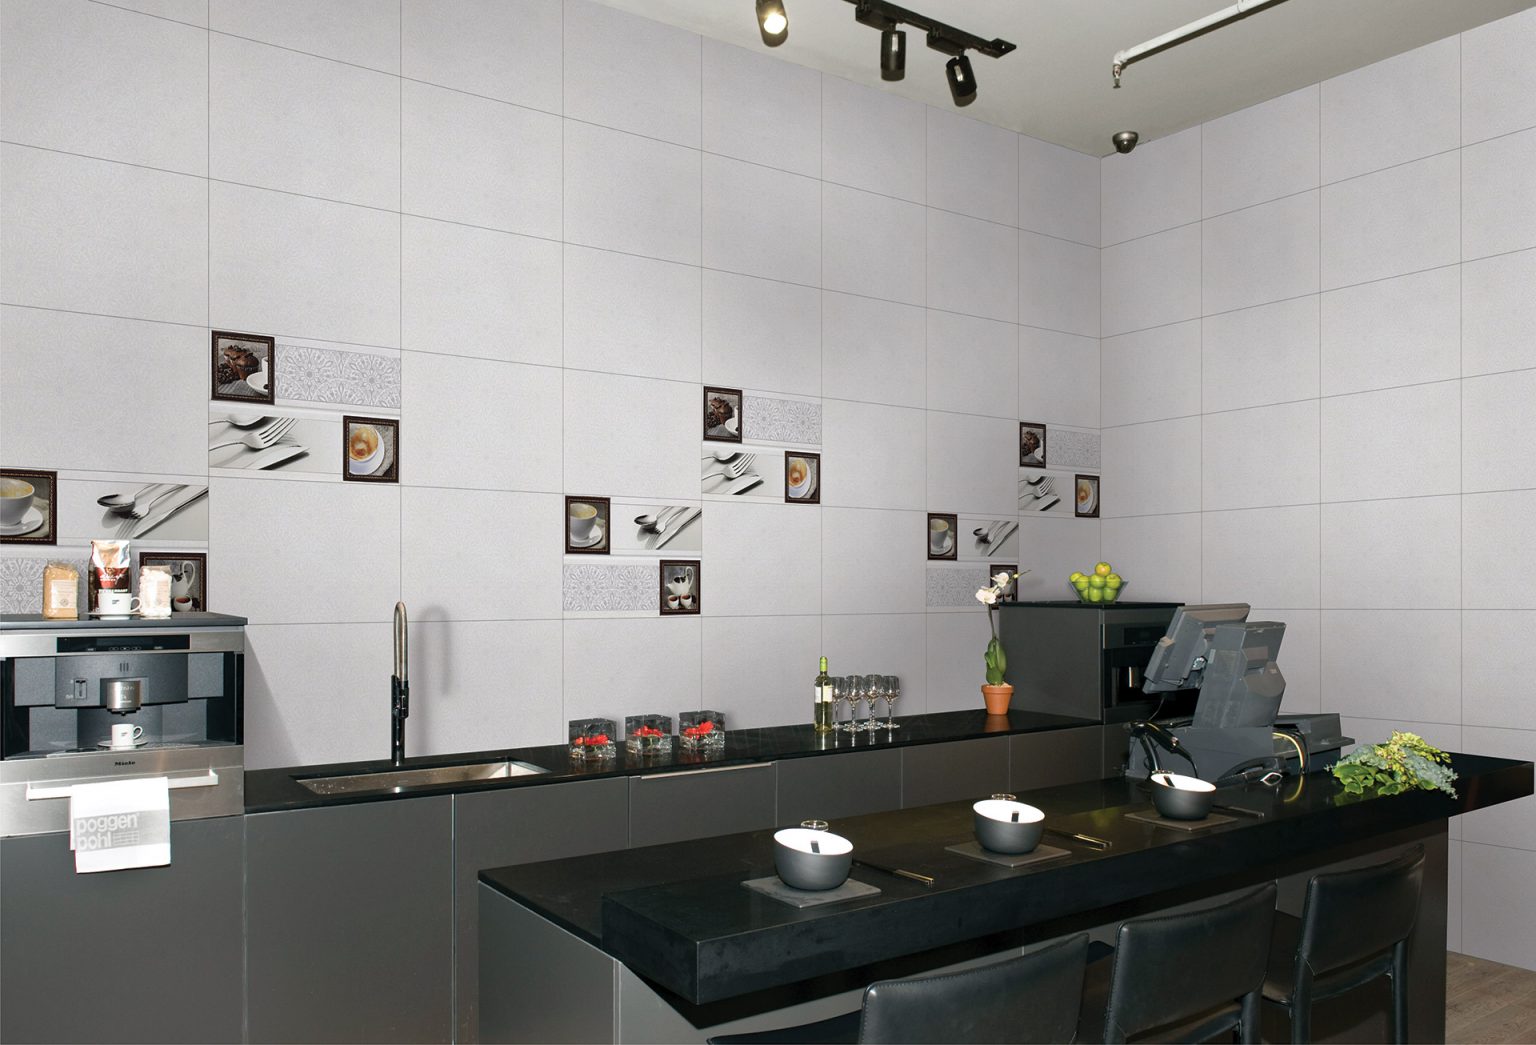 johnson kitchen wall tiles images